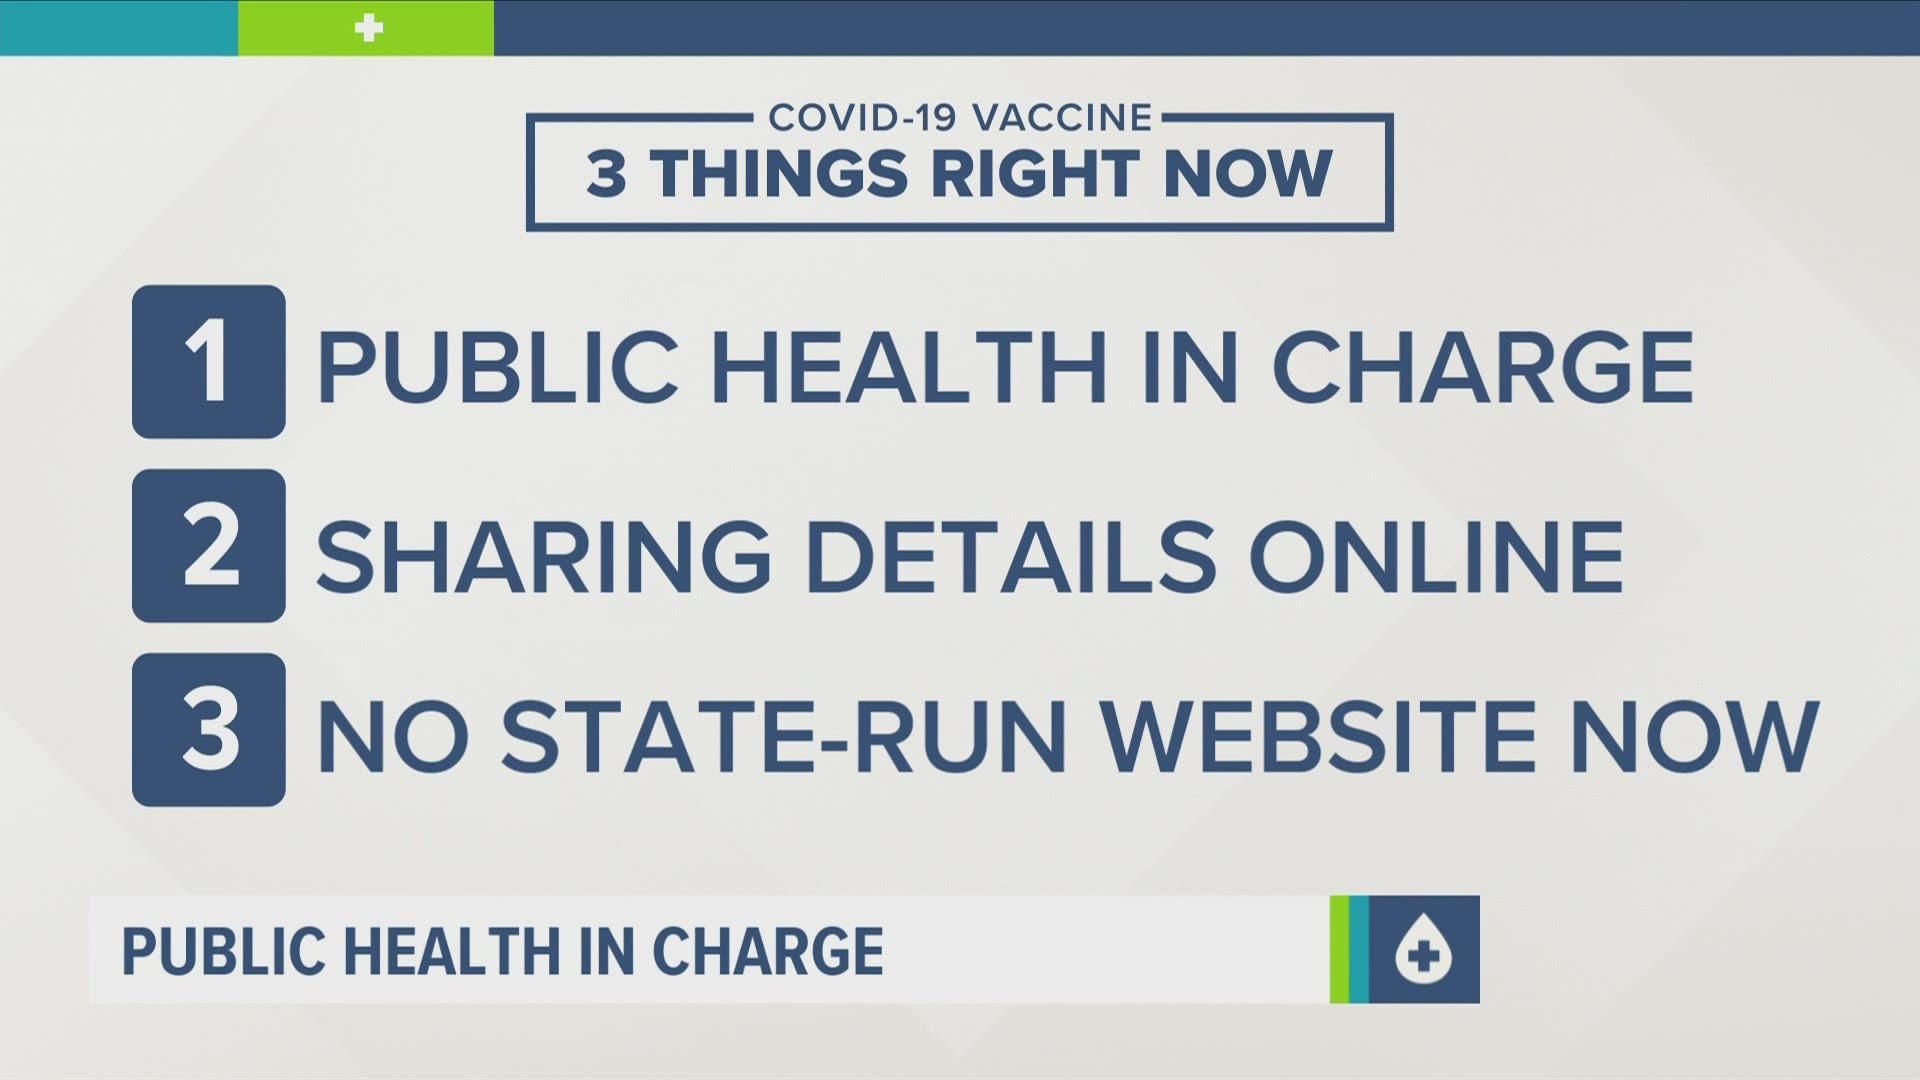 There is no state-run website right now to sign up for a vaccine appointment or to see which pharmacies or clinics near you have the vaccine.